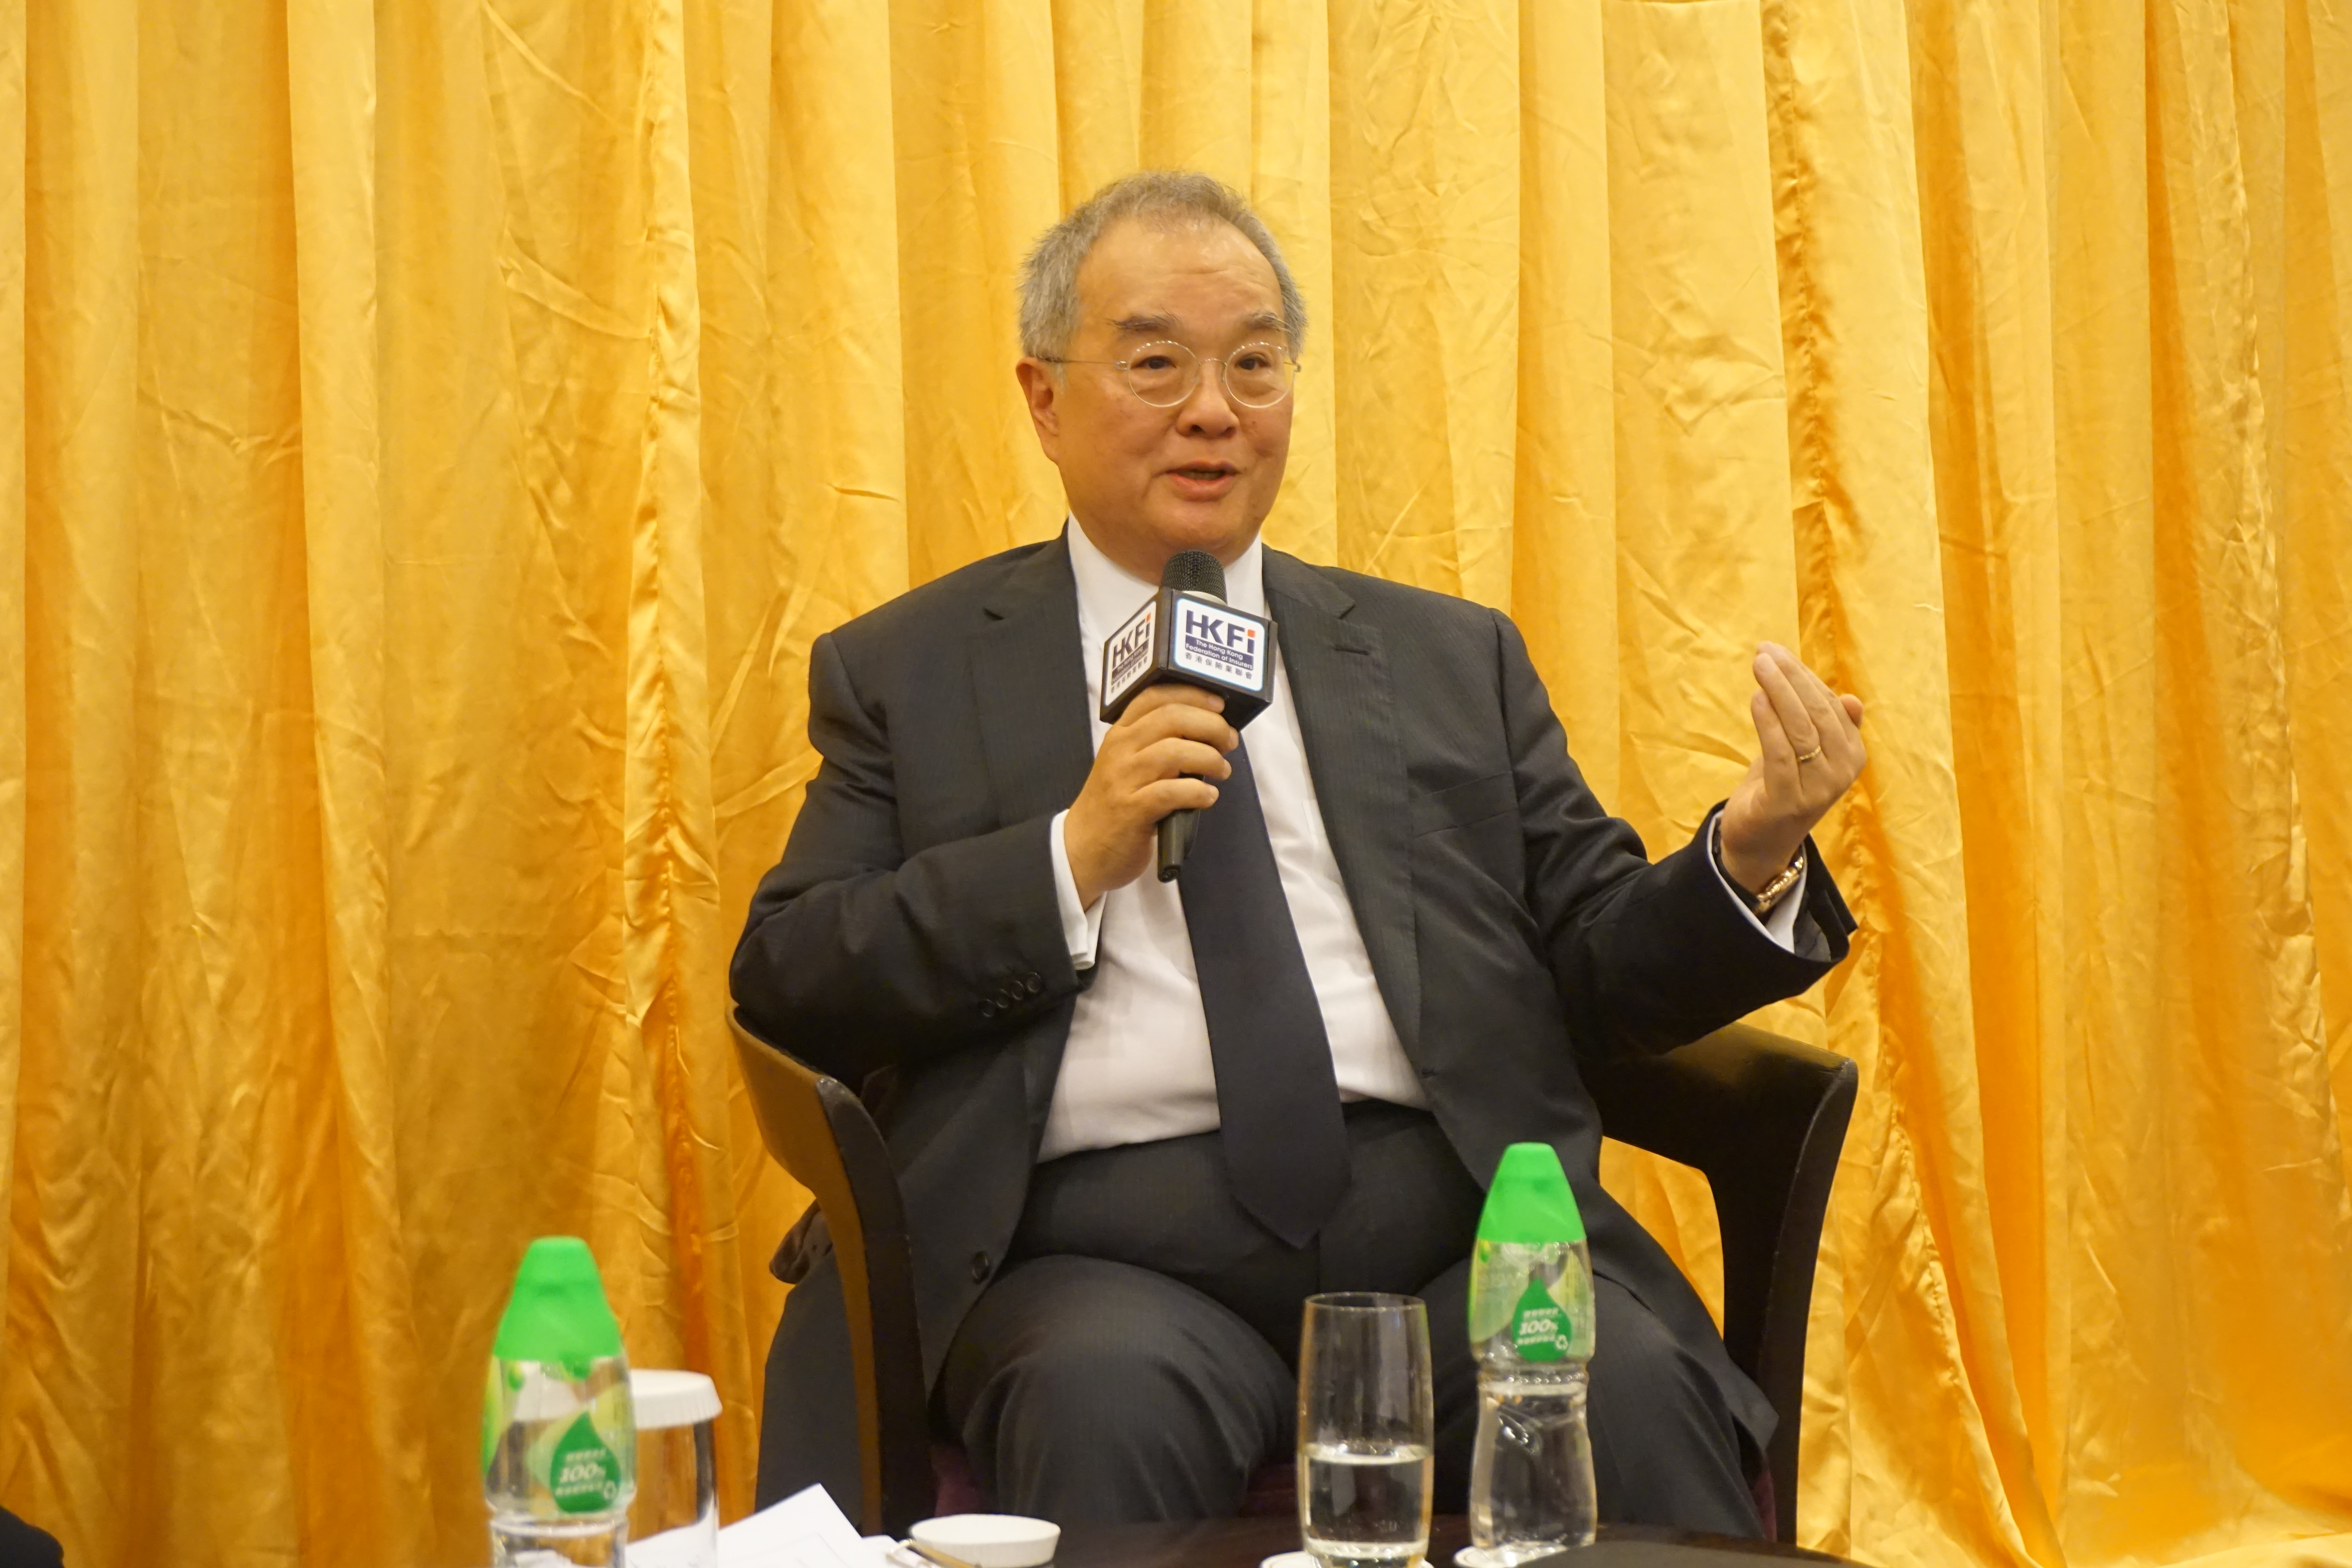 Lunch Talk by IIA Chairman Dr Moses Cheng - “Insurance in new economy: scaling new heights with IIA”